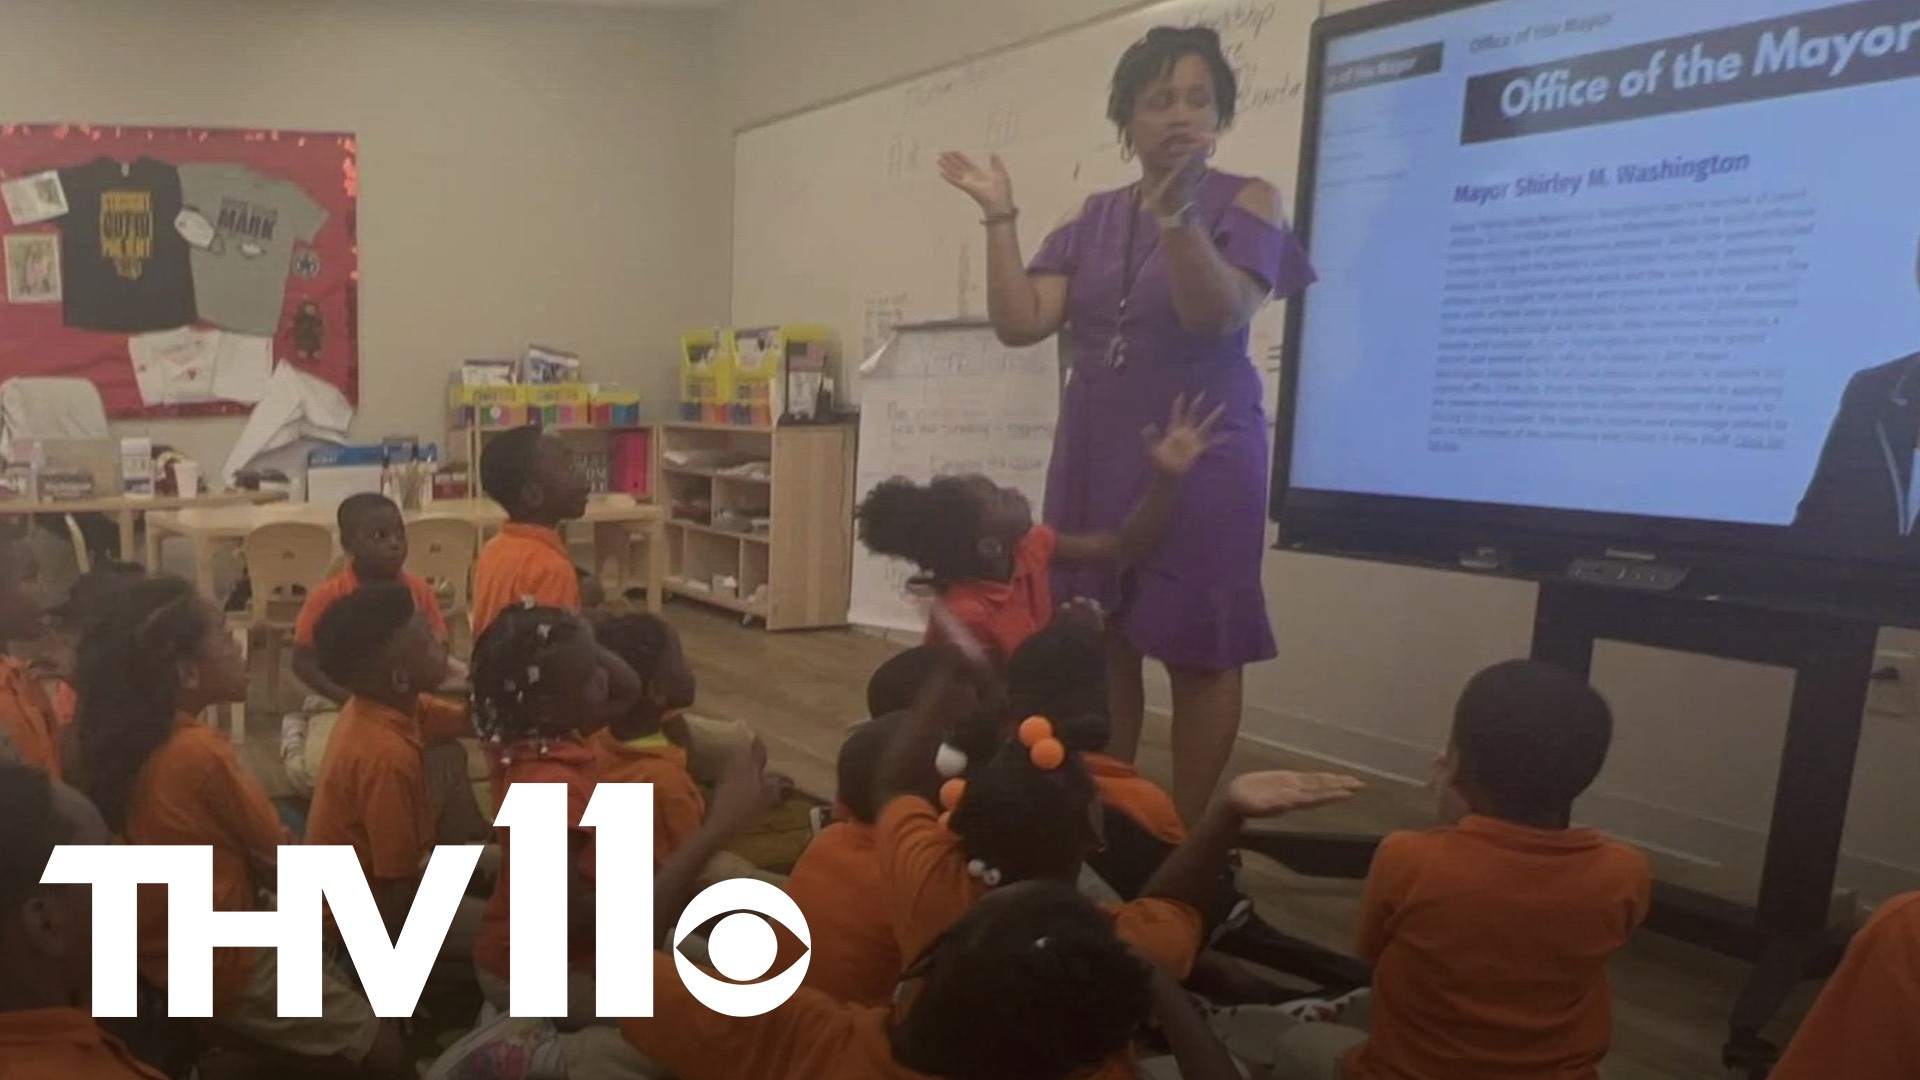 One educator is working to change the narrative of Pine Bluff and that begins with an early literacy program where she's hoping to spark positive change.